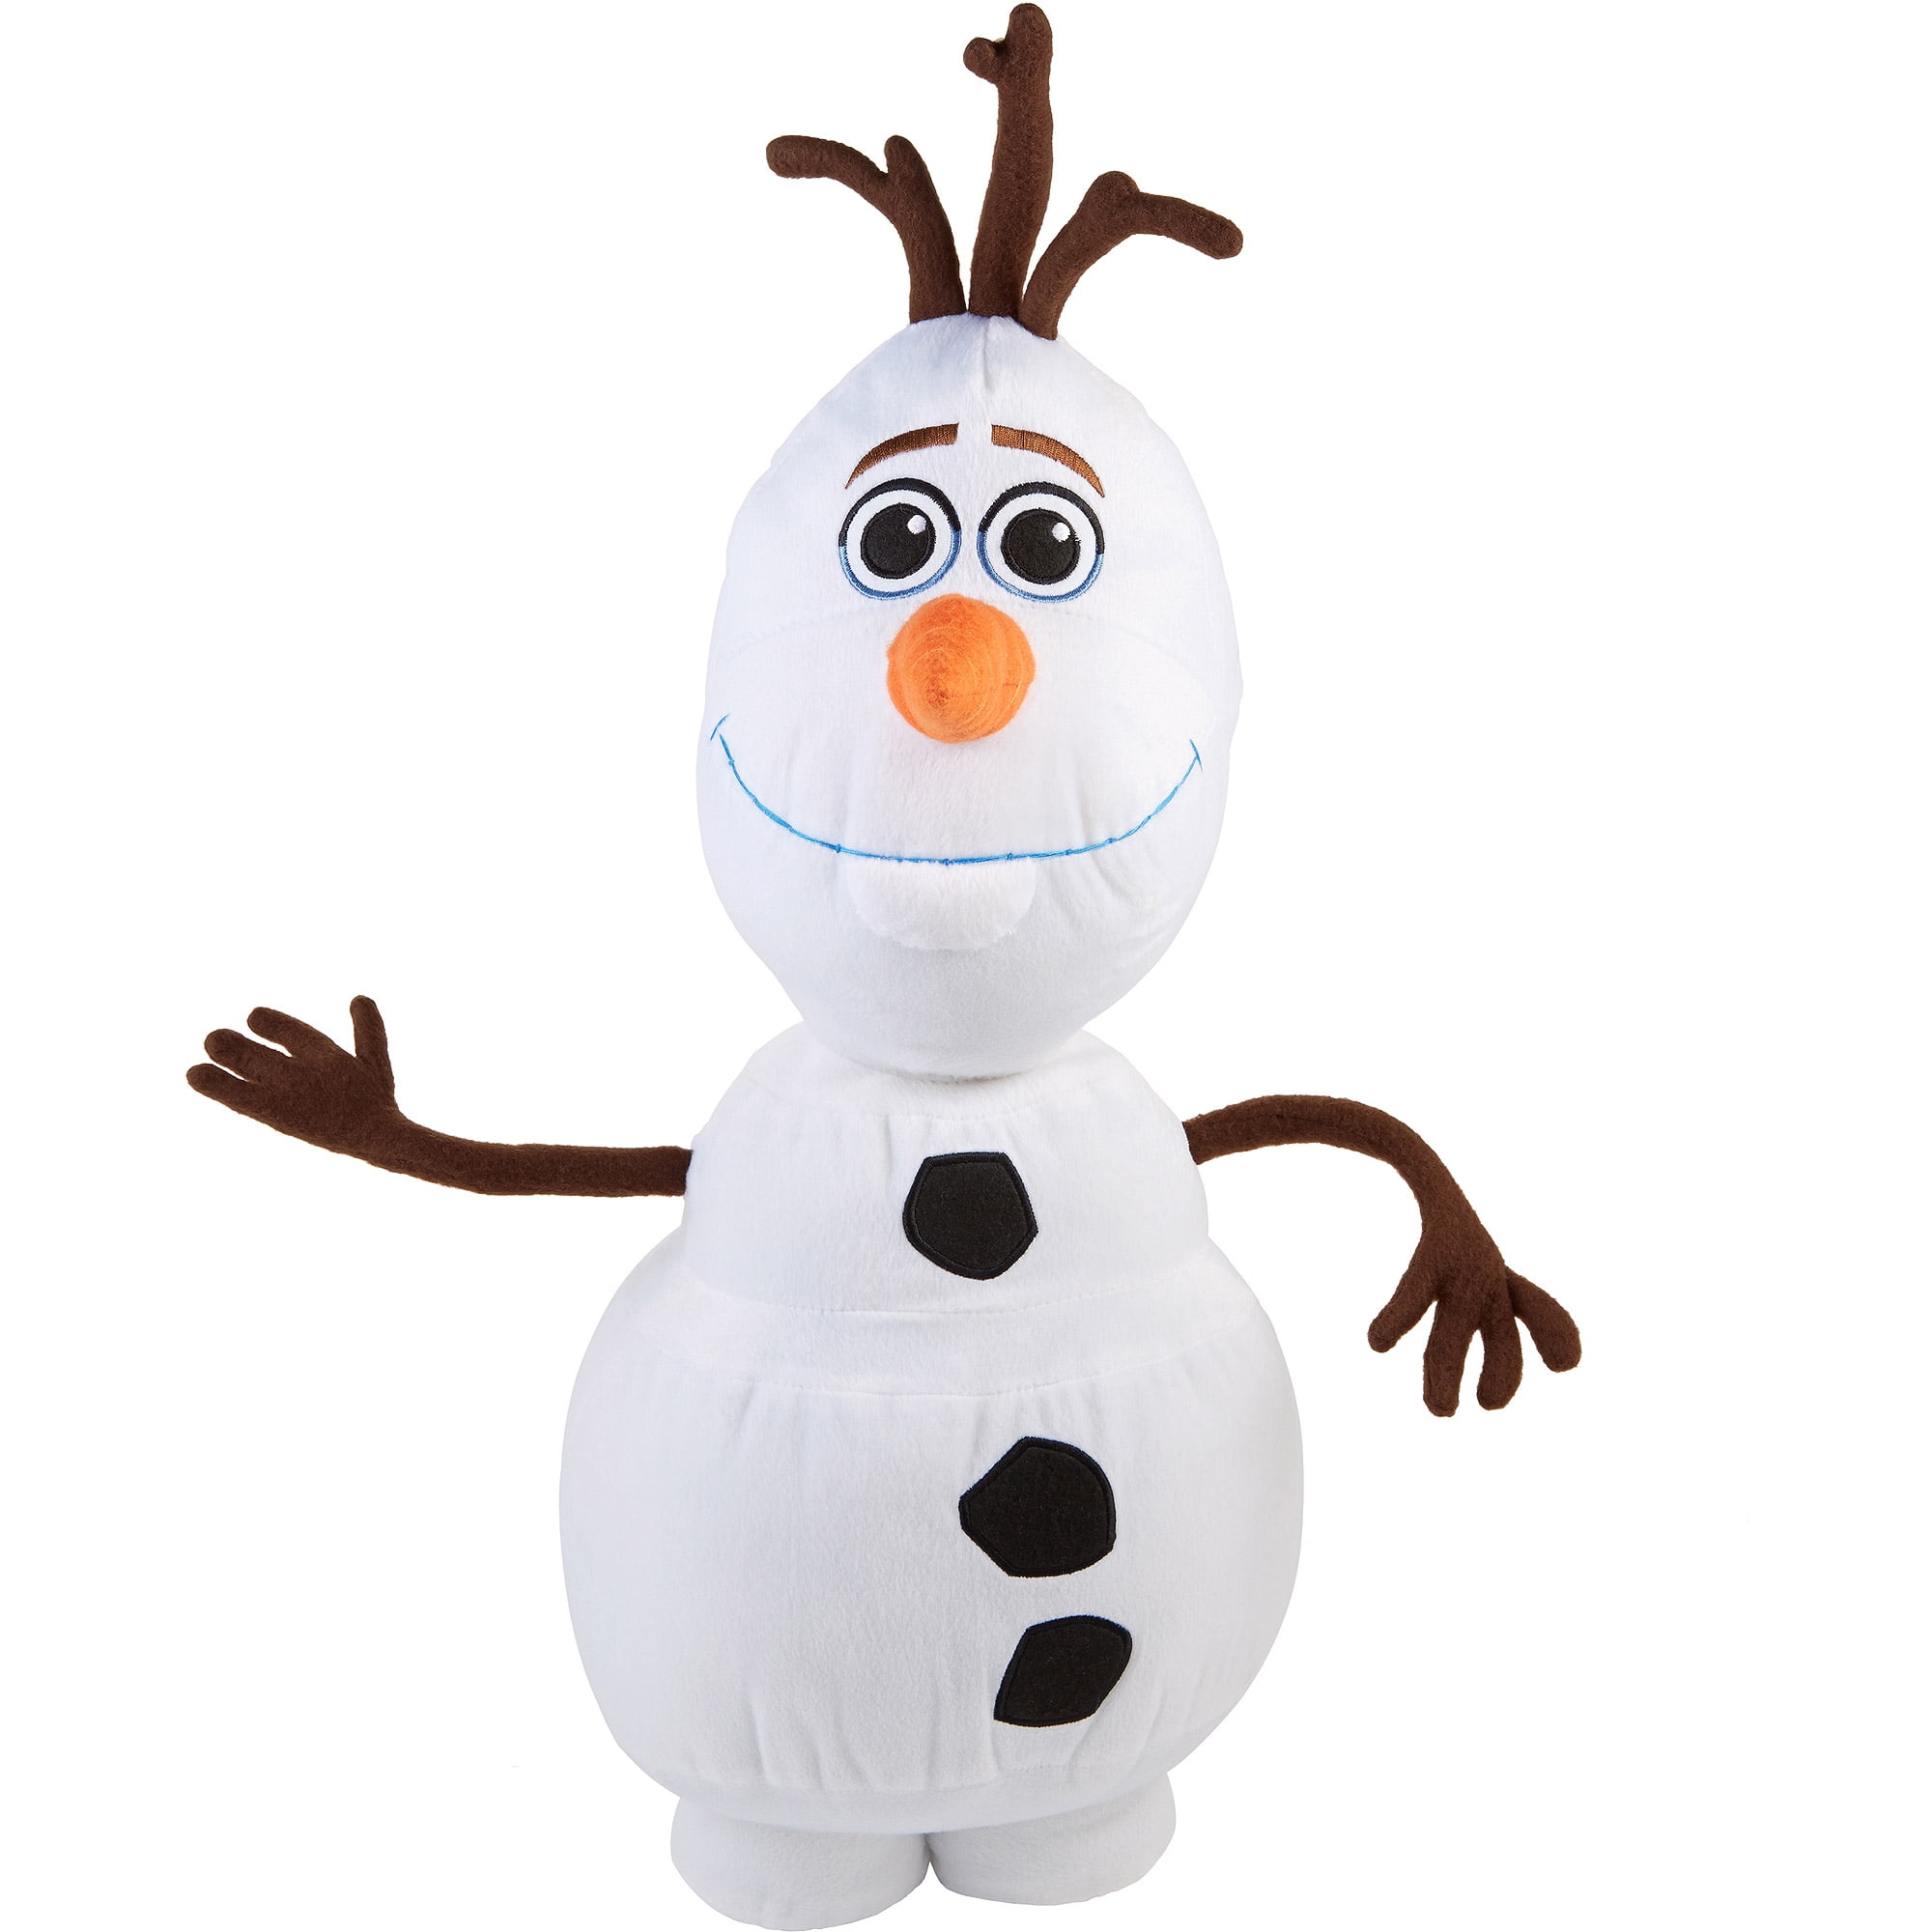 Disney Frozen Olaf Cuddle Pillow 2nd Day Delivery for sale online 